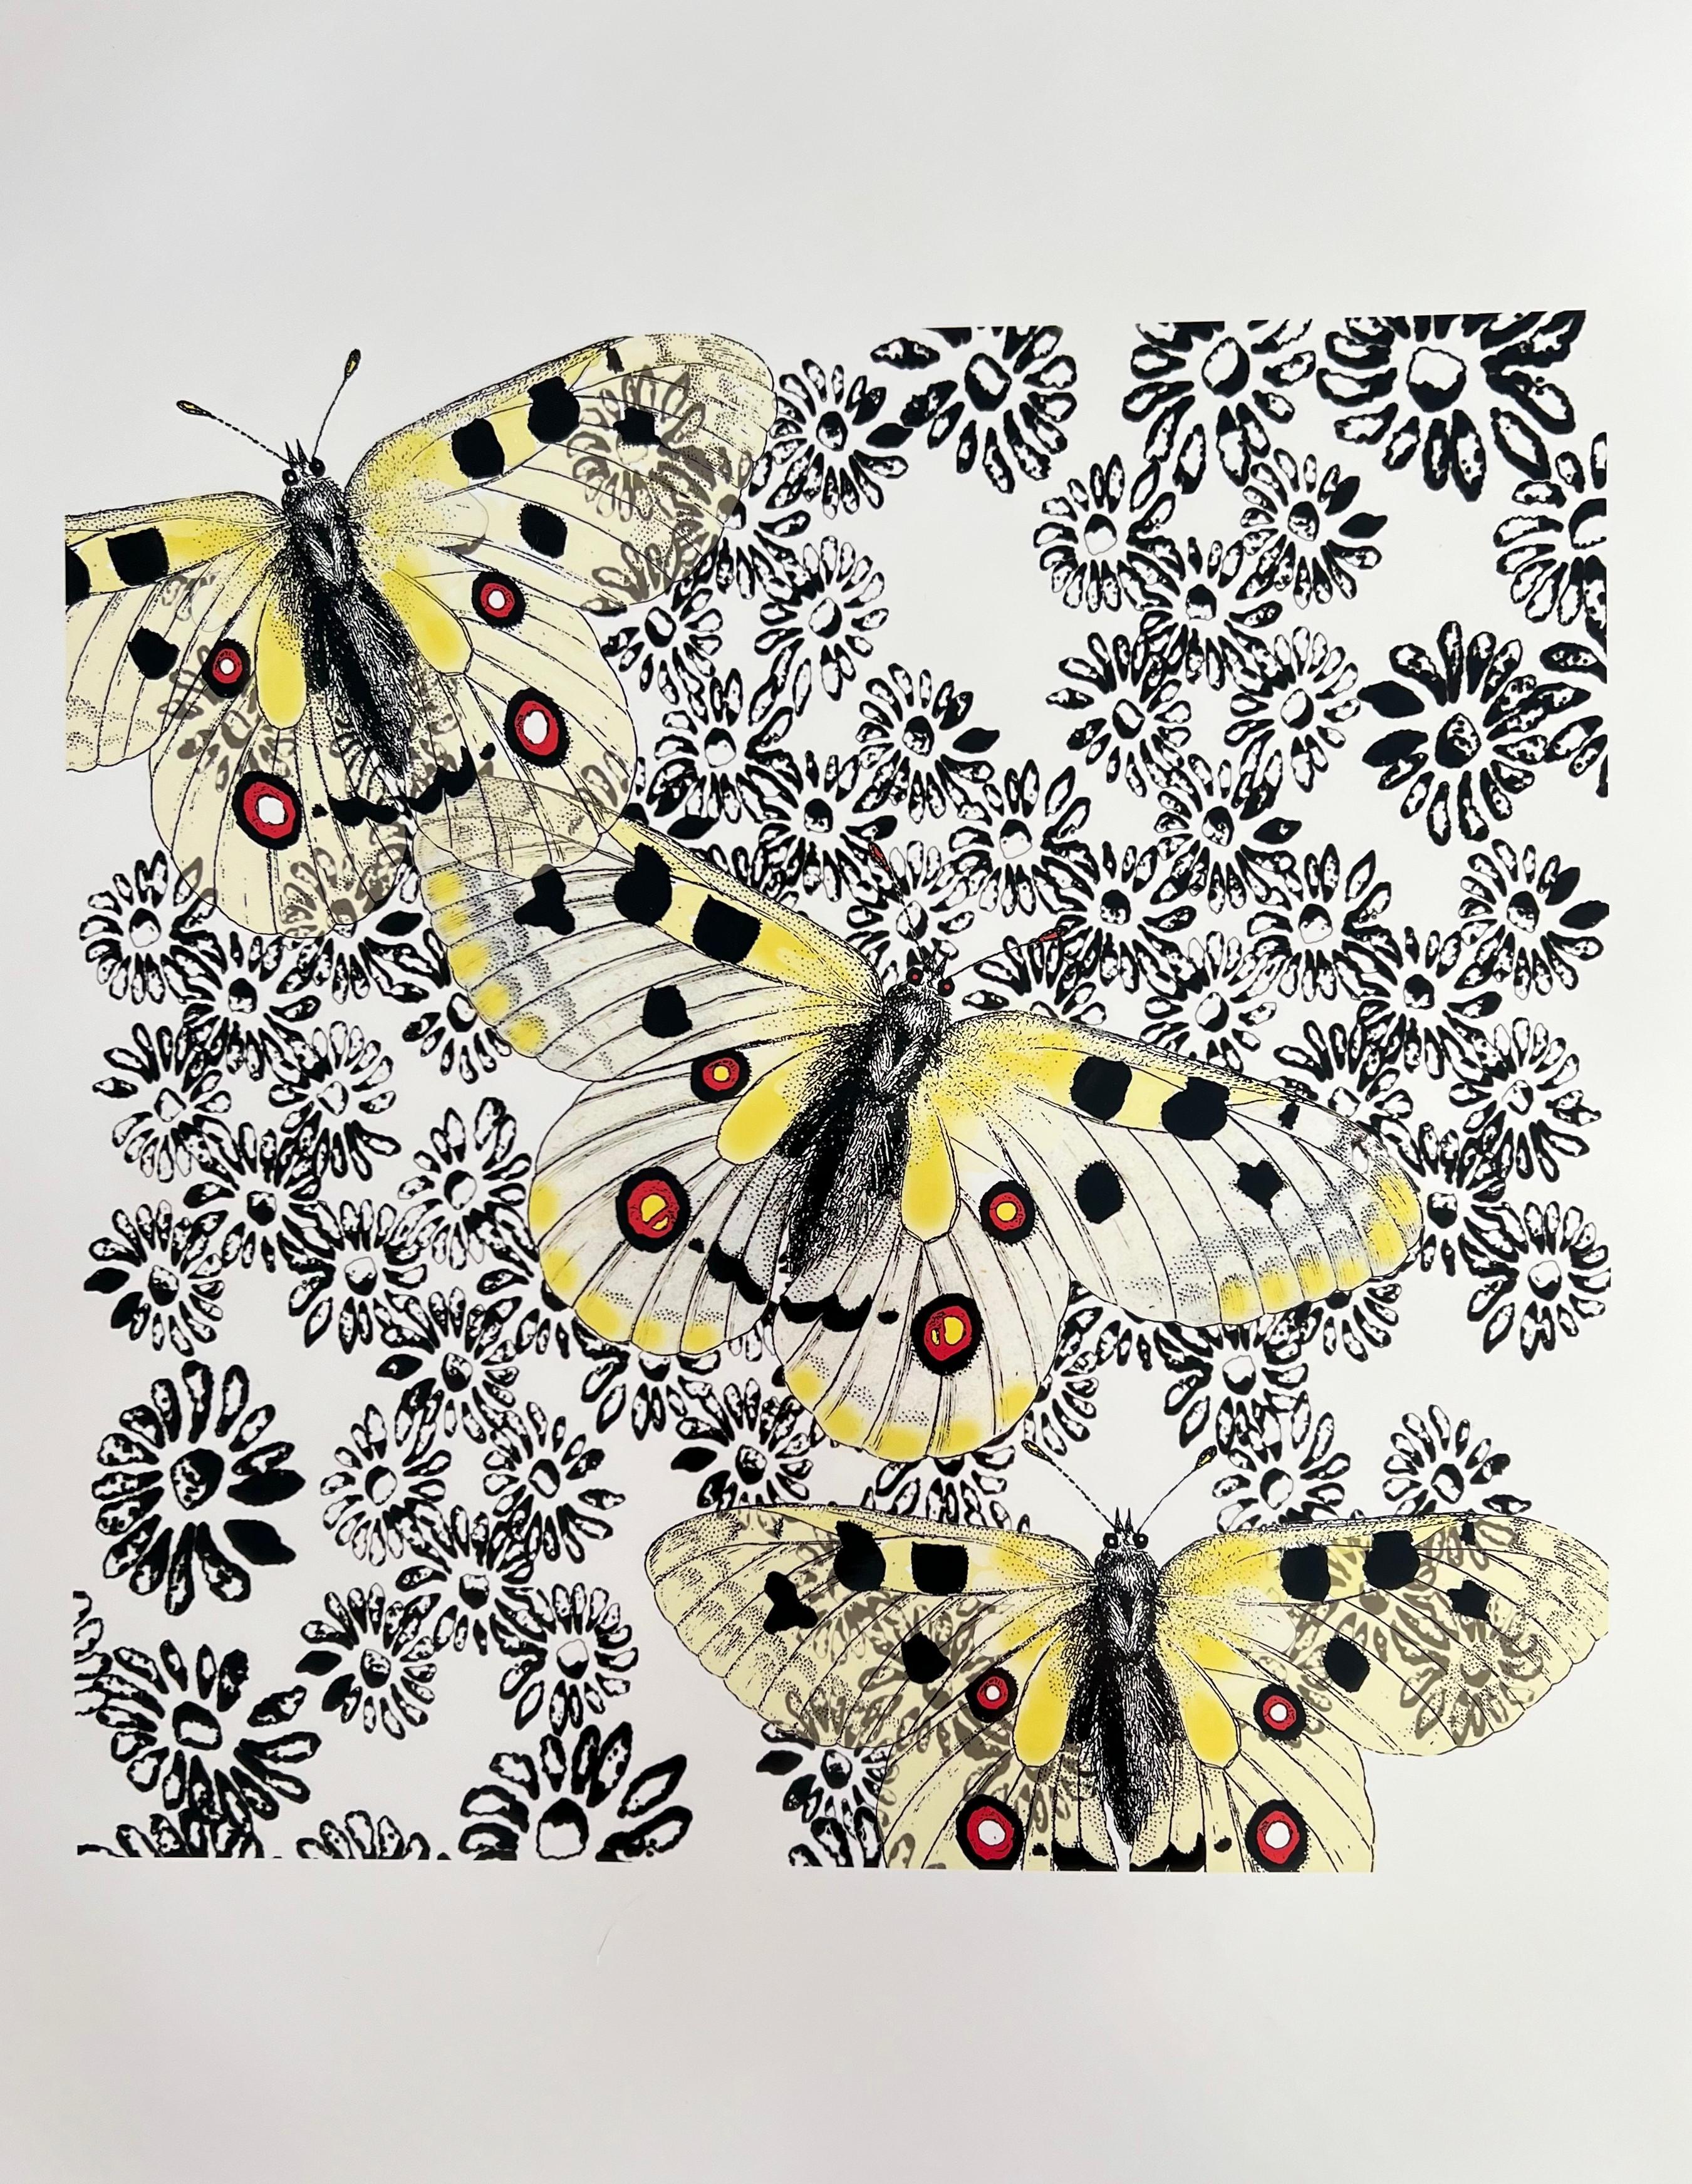 Butterflies and Daisies (Cut-out, Collage, Black & White, Patterns, Organic) - Print by Louise Marler